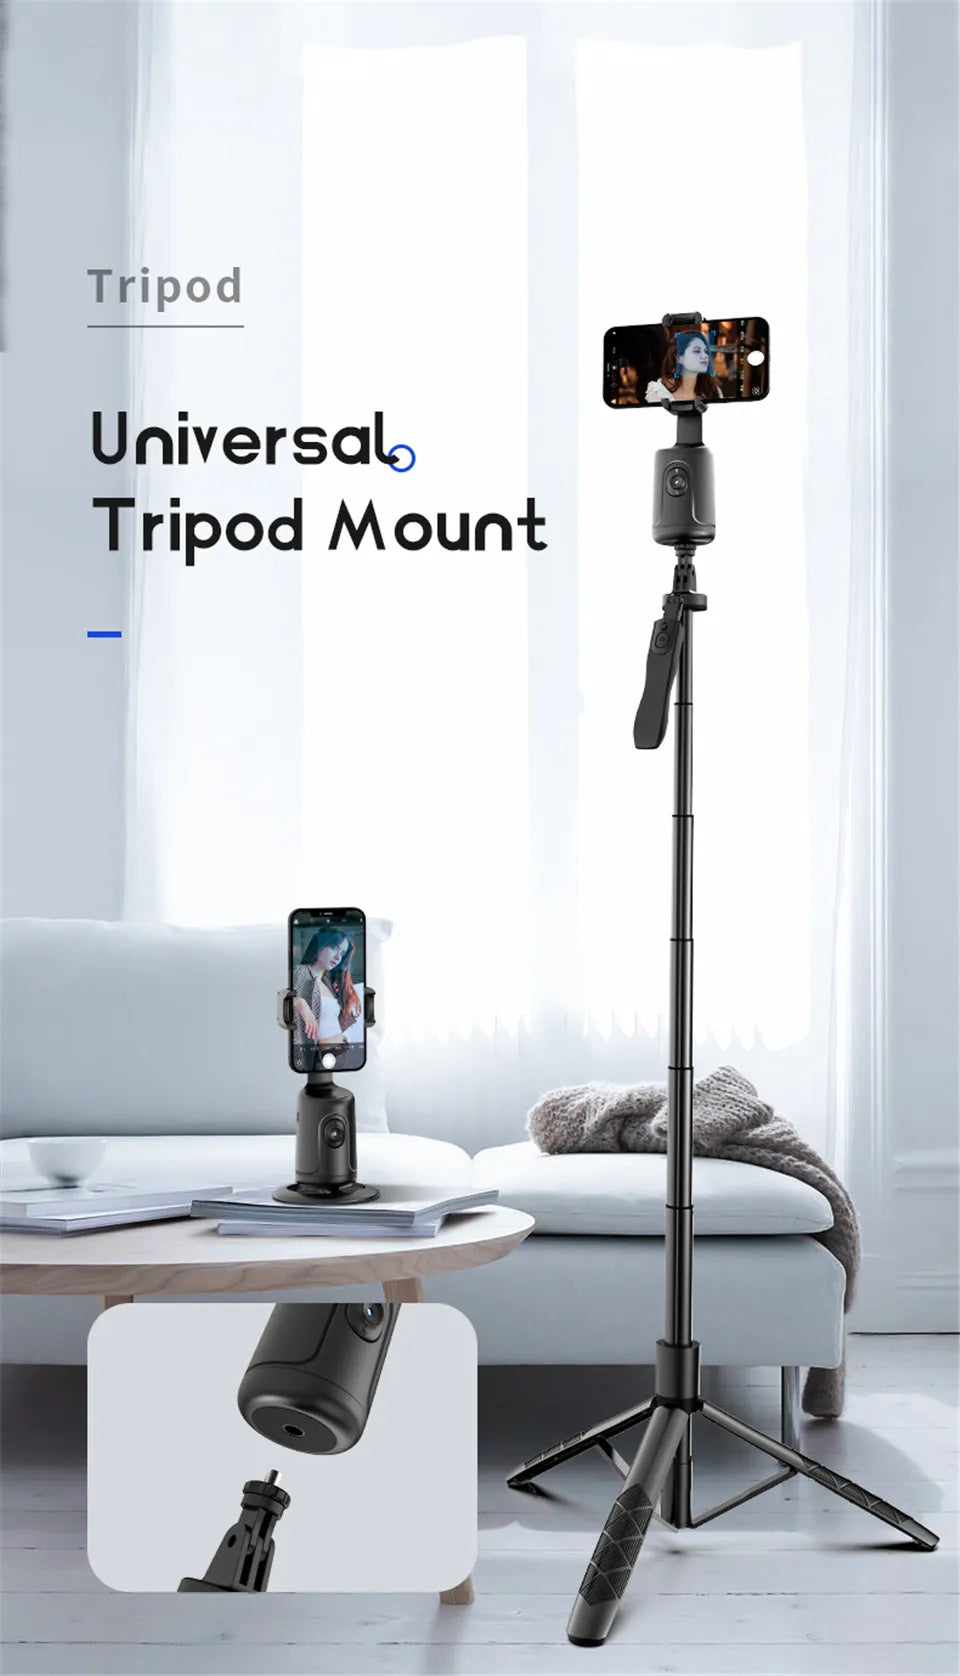 360 Auto-Tracking Rotation Stabilizer With Selfie Tripod. Live Video Photography For Content Creators/Bloggers For TikTok Instagram YouTube.